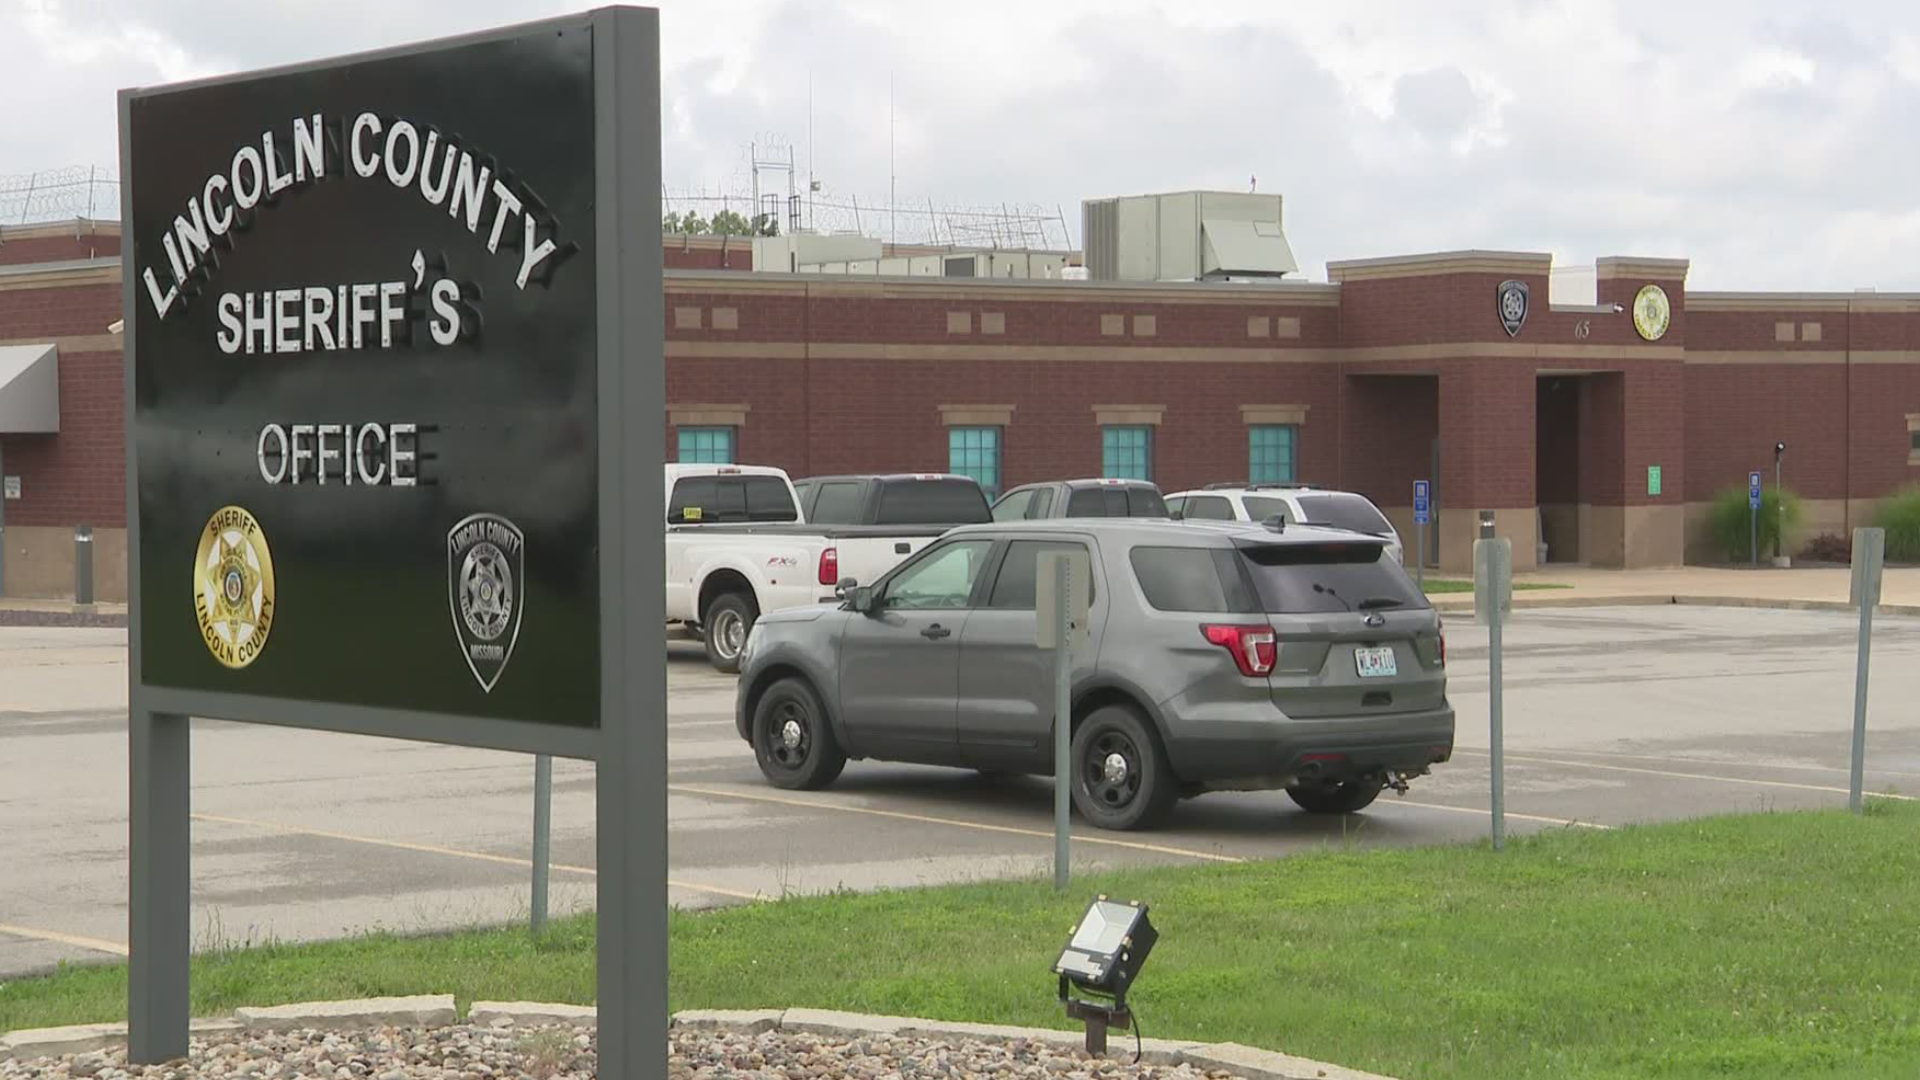 The complaint accuses sheriff’s office employees of raping a woman who was in custody at the county jail facility. The FBI investigated the claims in 2017.